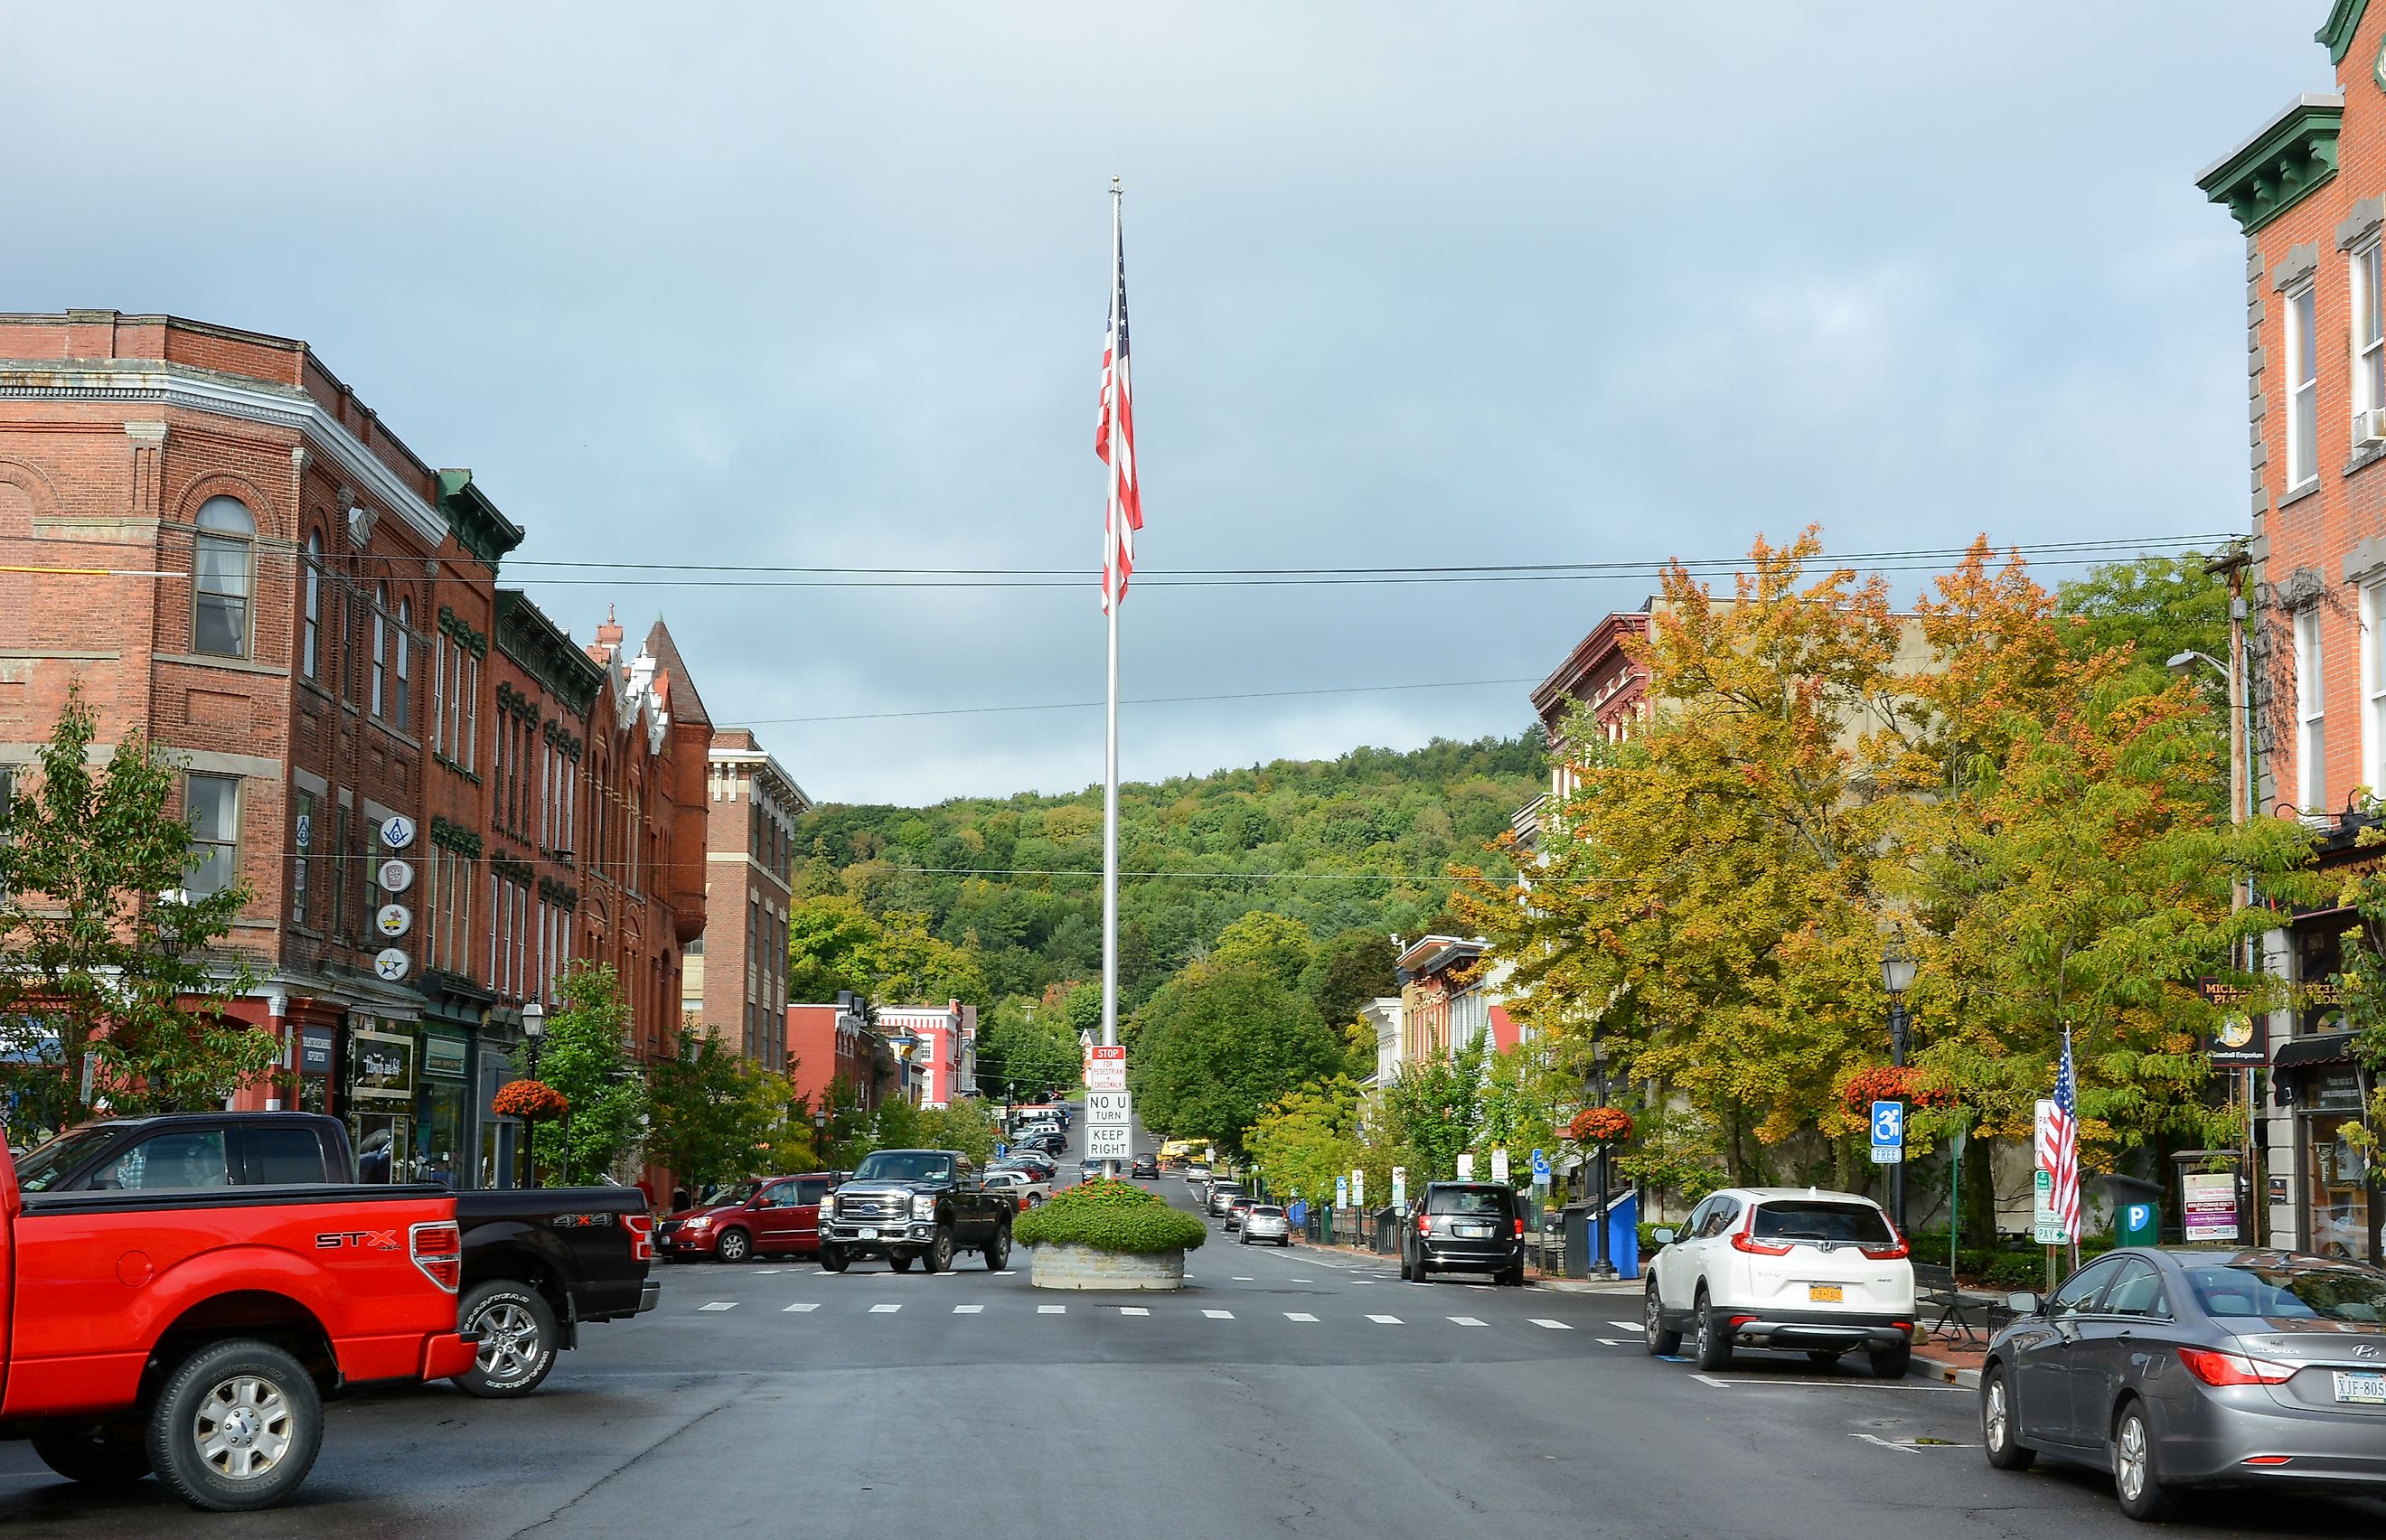 COOPERSTOWN, NEW YORK - SEPT 28, 2018: Main Street in the upstate town and home of the National Baseball Hall of Fame